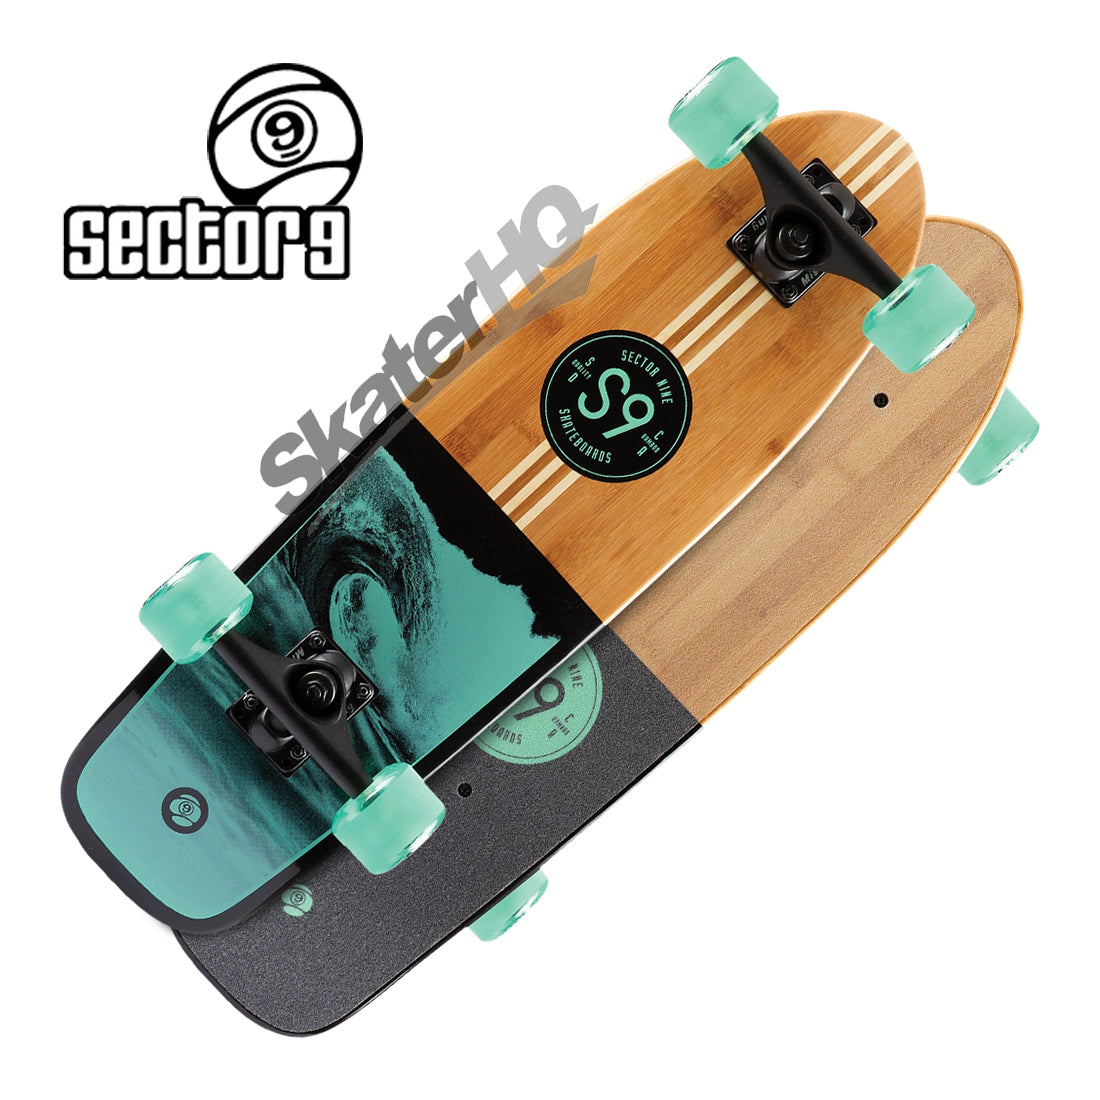 Sector 9 Bambino Bico 7.5x26.5 Complete - Bamboo Skateboard Completes Longboards